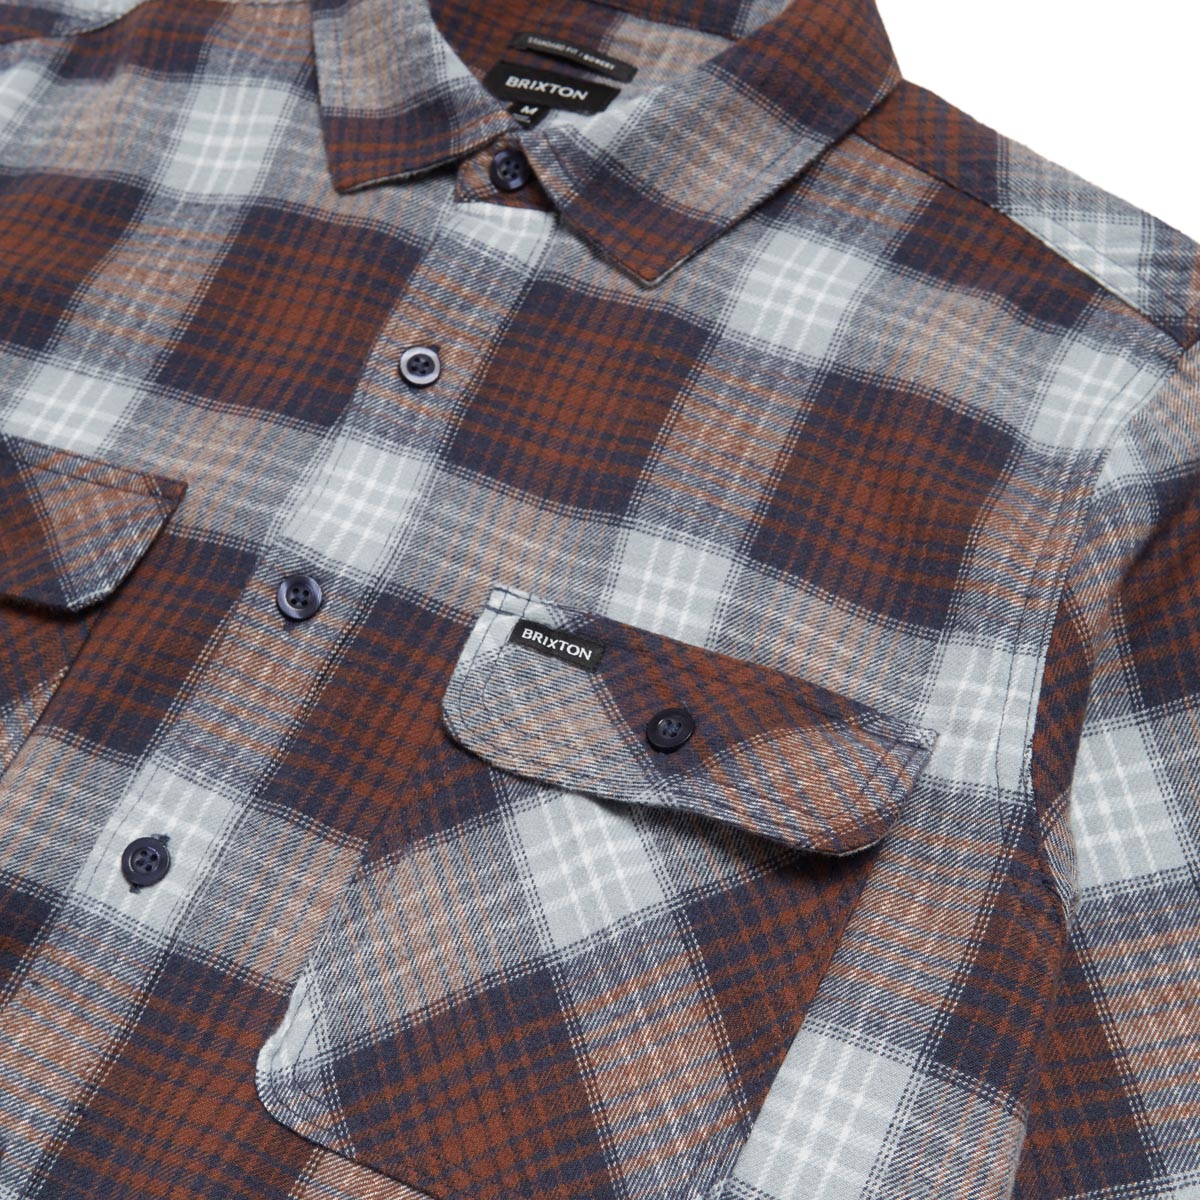 Brixton Bowery Lightweight Ultra Flannel Shirt - Washed Navy/Dusty Blue image 3